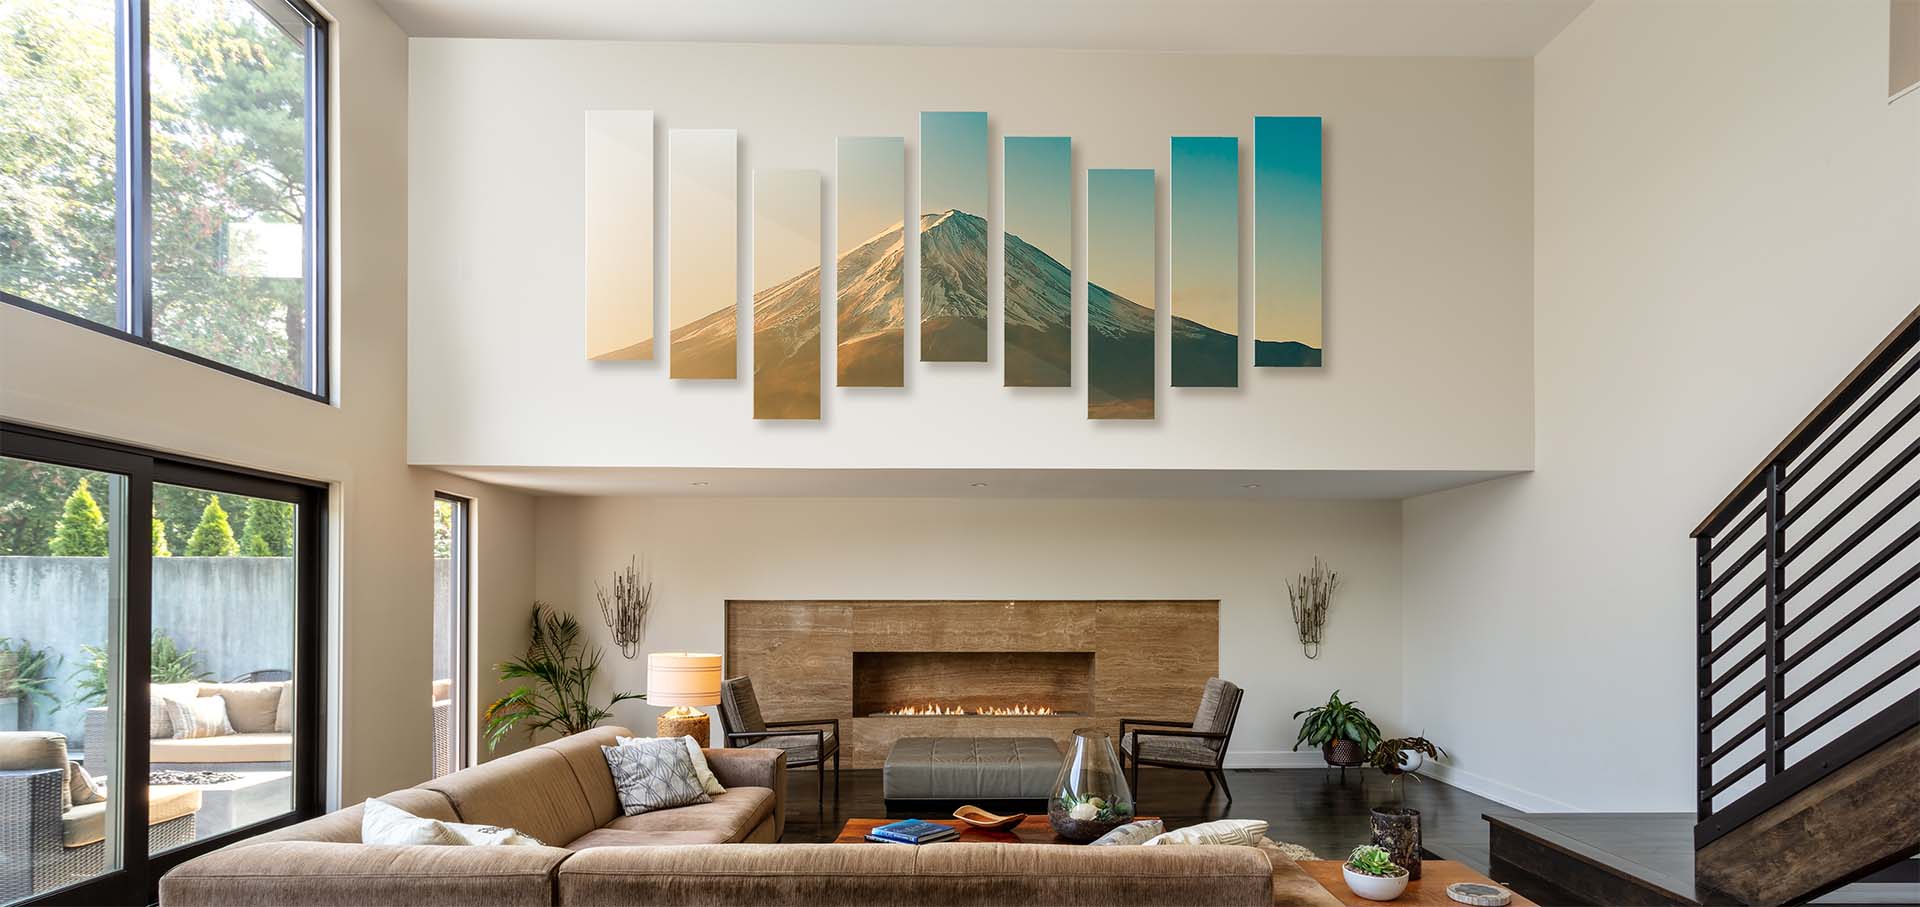 Gallery wall of ChromaLuxe metal prints